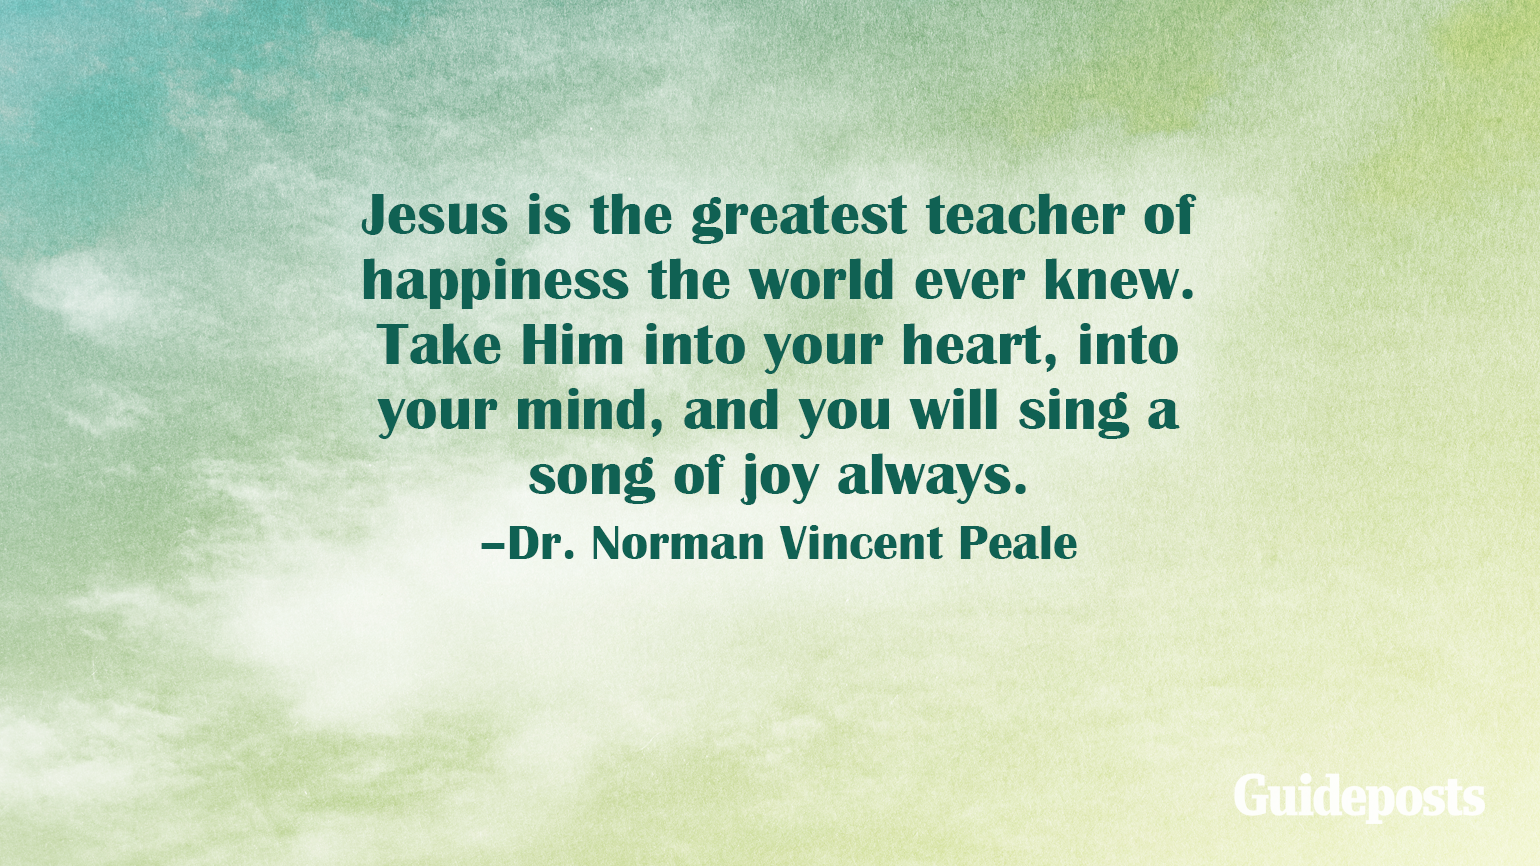 Jesus is the greatest teacher of happiness the world ever knew. Take Him into your heart, into your mind, and you will sing a song of joy always.